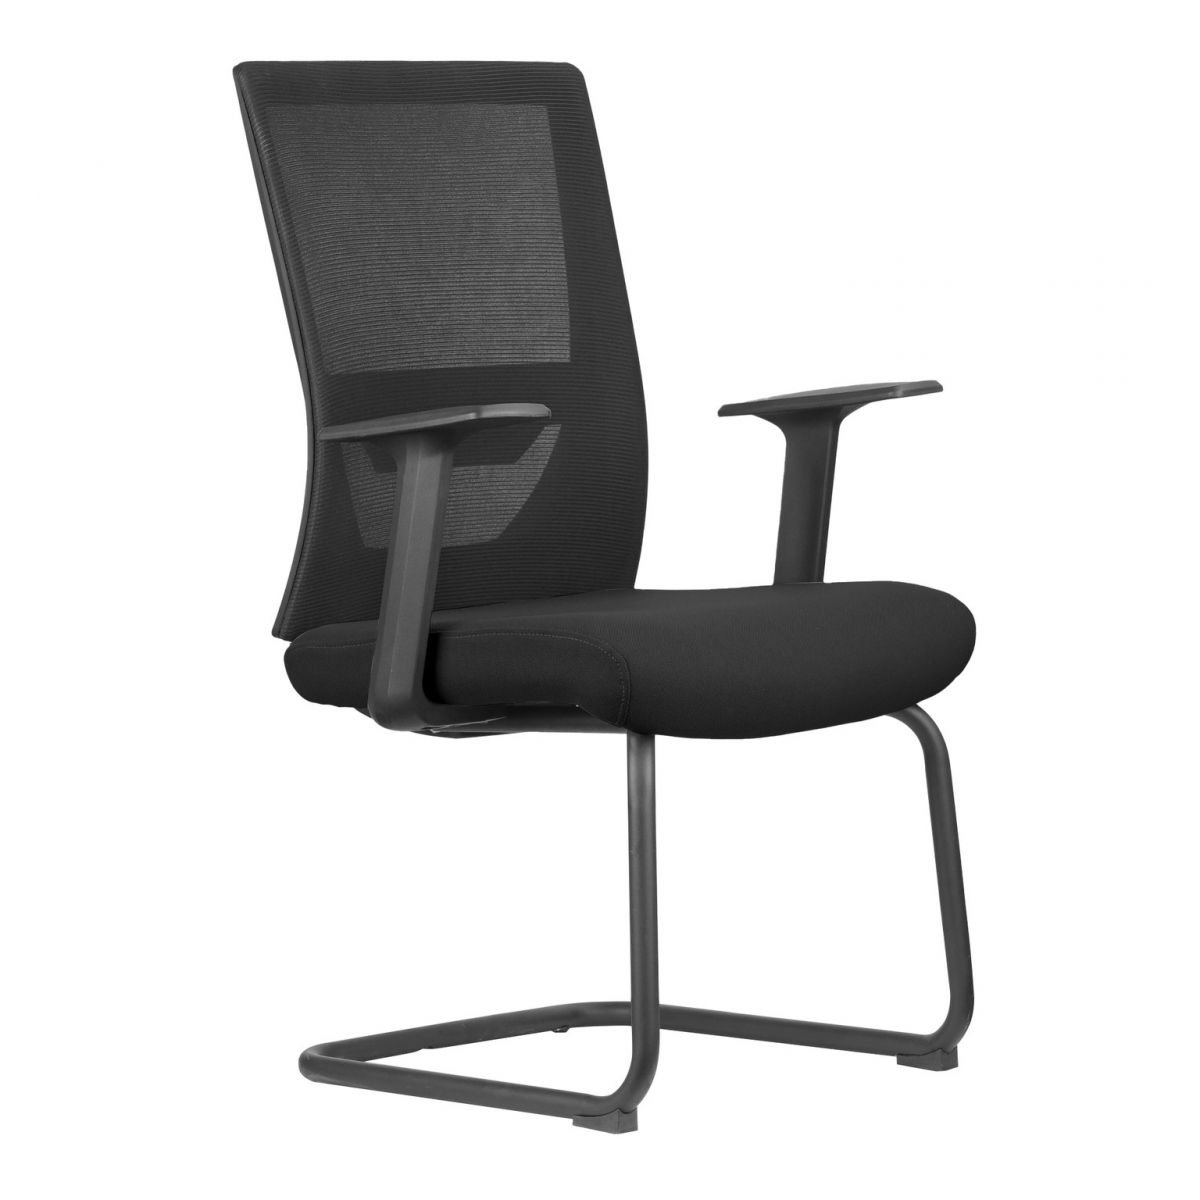 Minimalist Black Ergonomic Upholstered Studio Chairs with Arms, Without Headrest, Casters Not Included